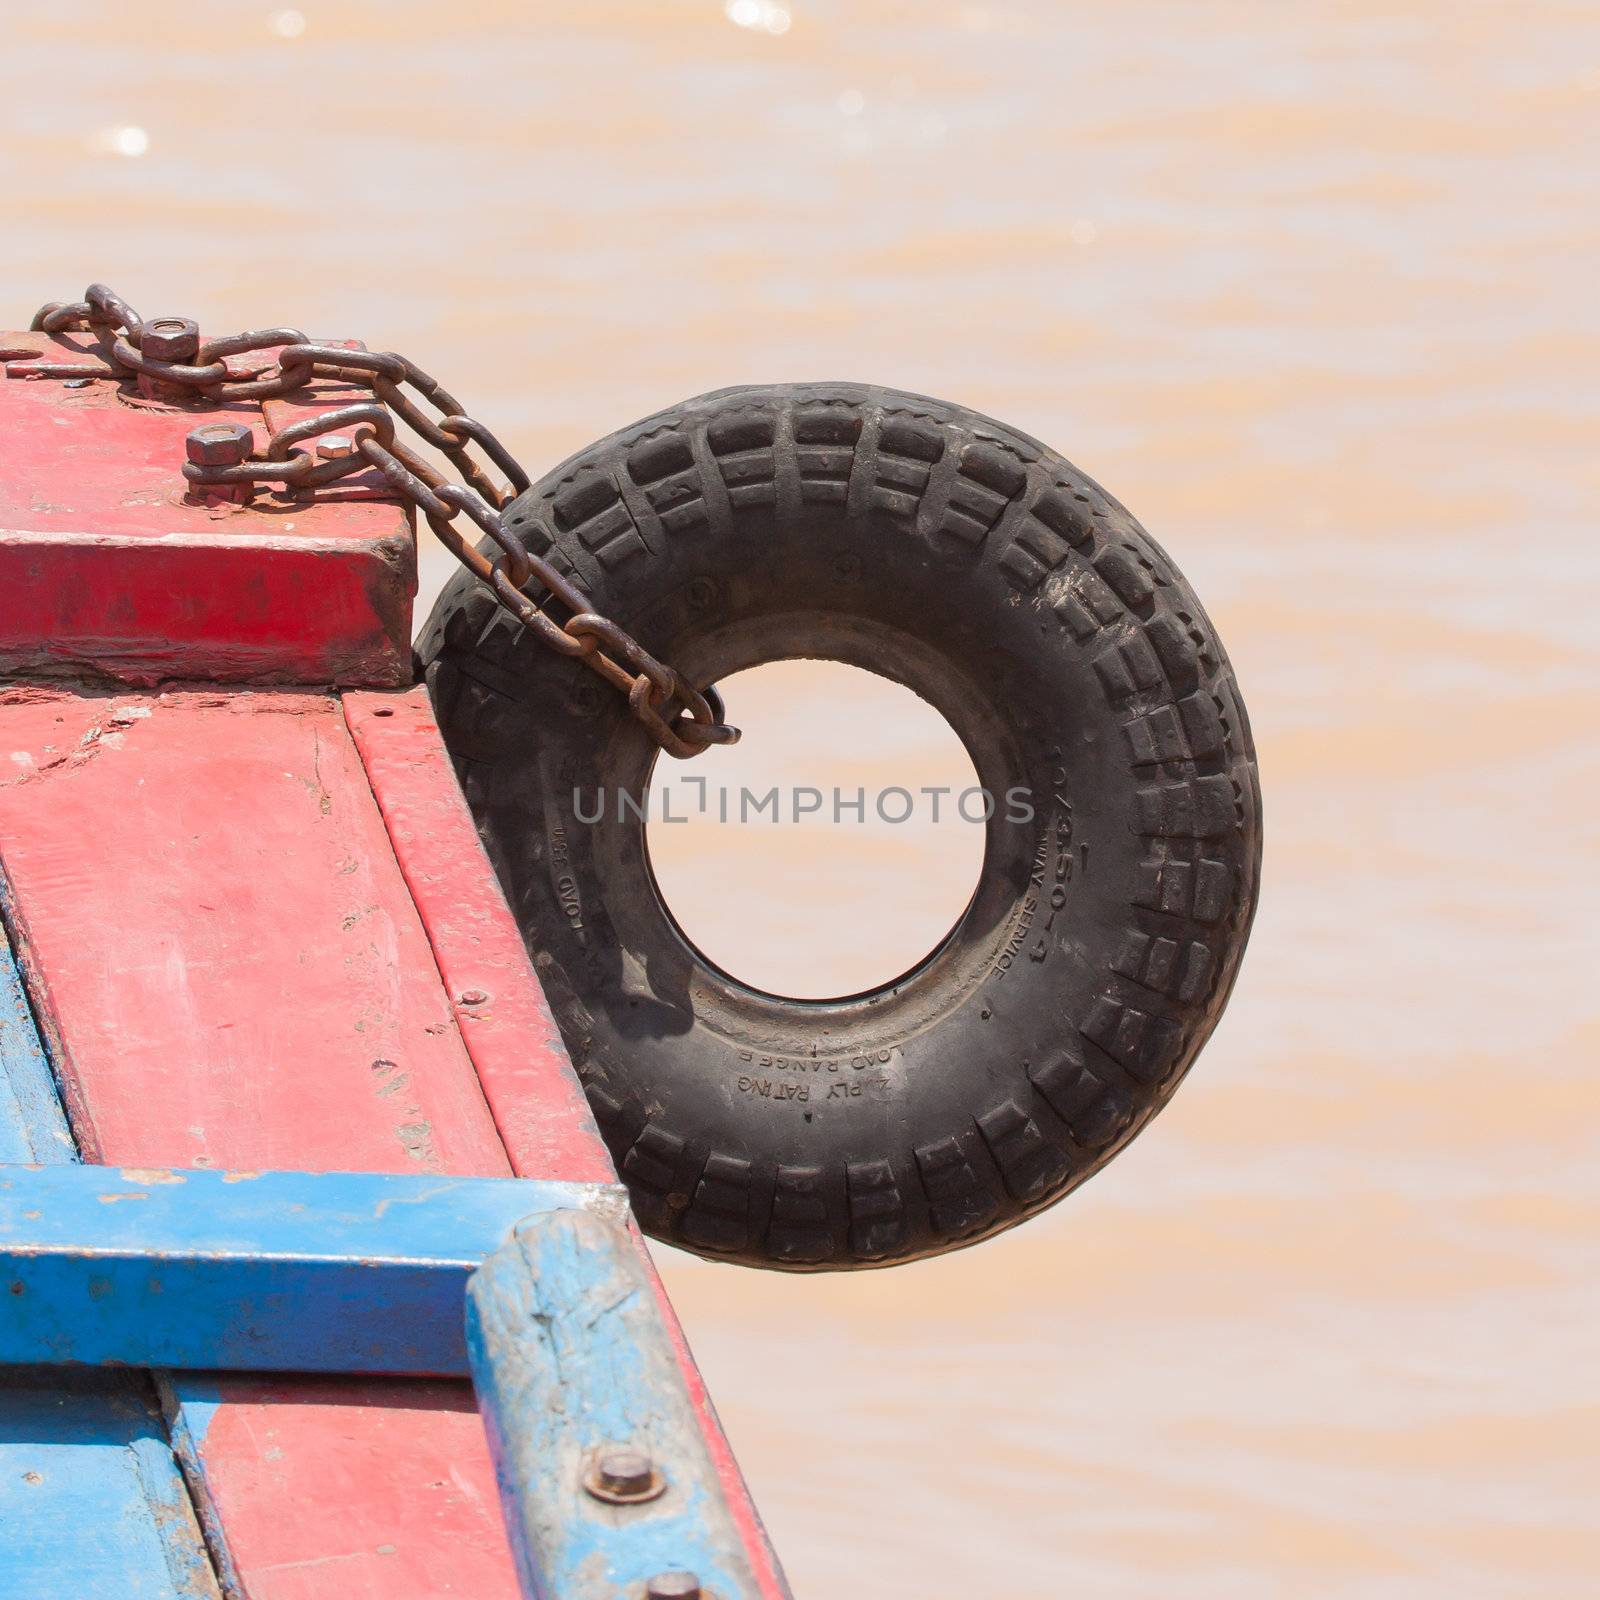 Fender on a red boat in the Mekong delta by michaklootwijk